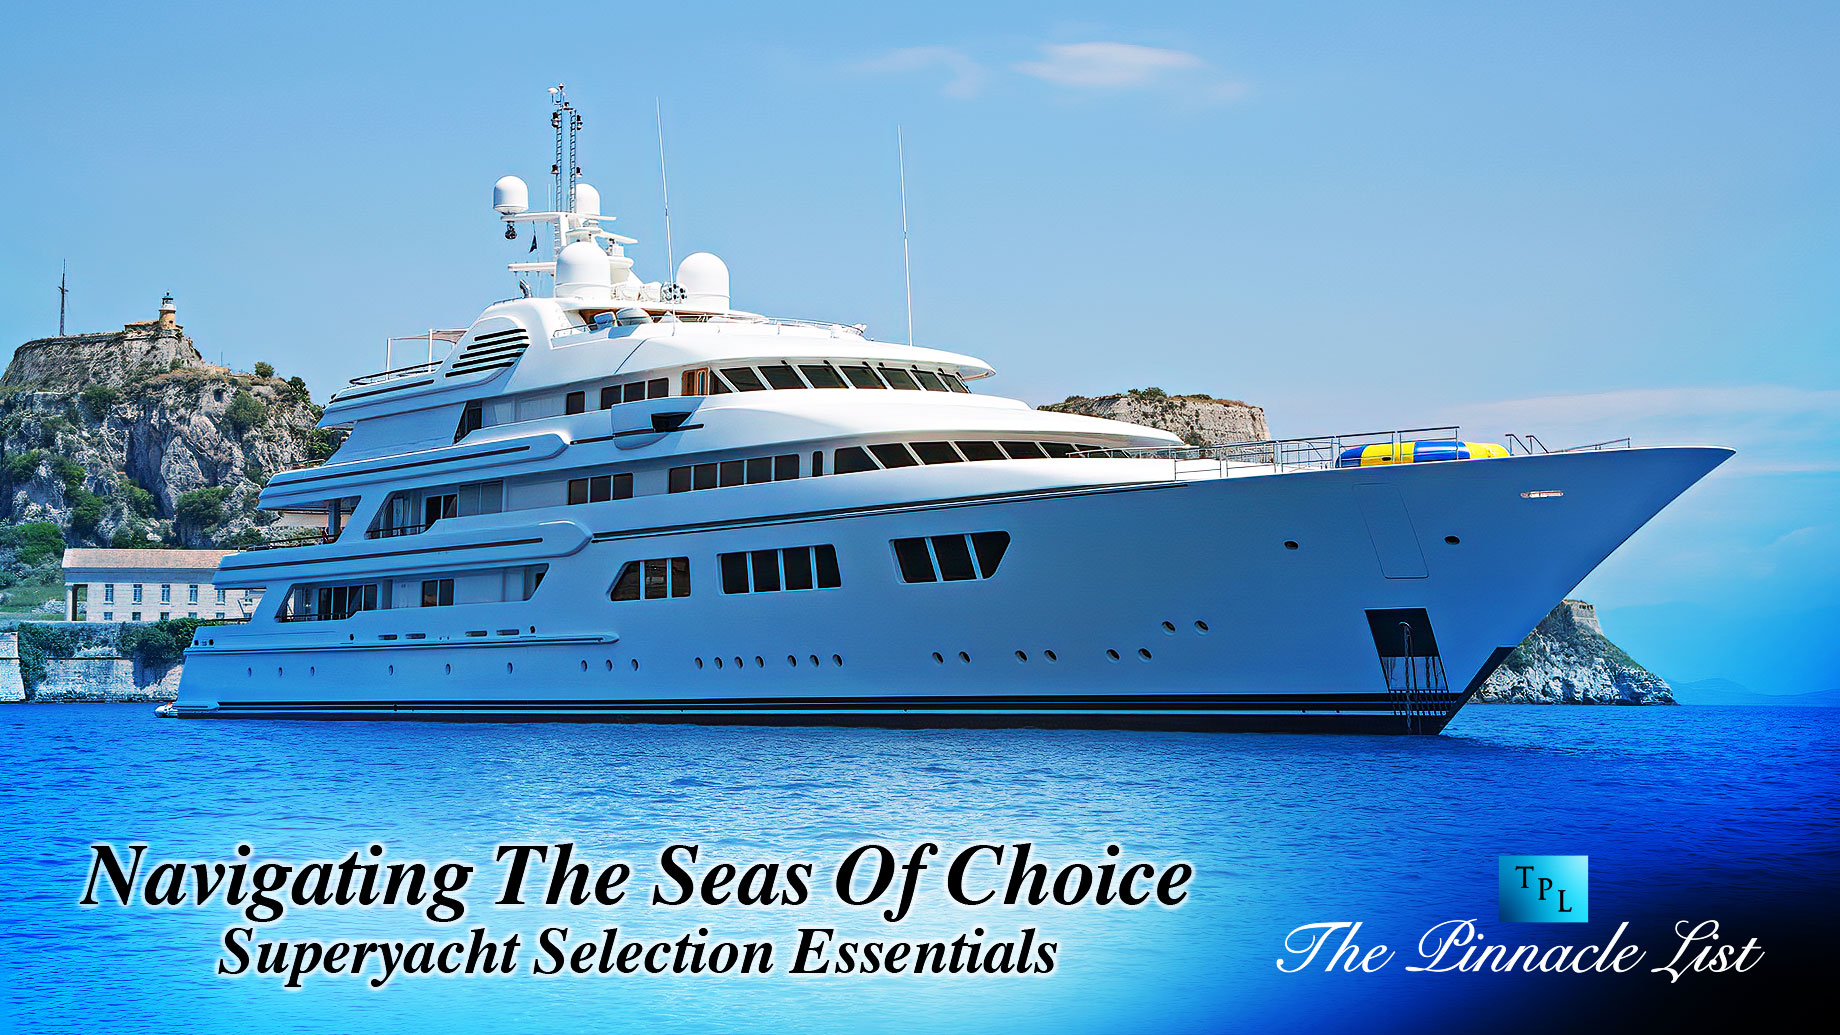 Navigating The Seas Of Choice: Superyacht Selection Essentials